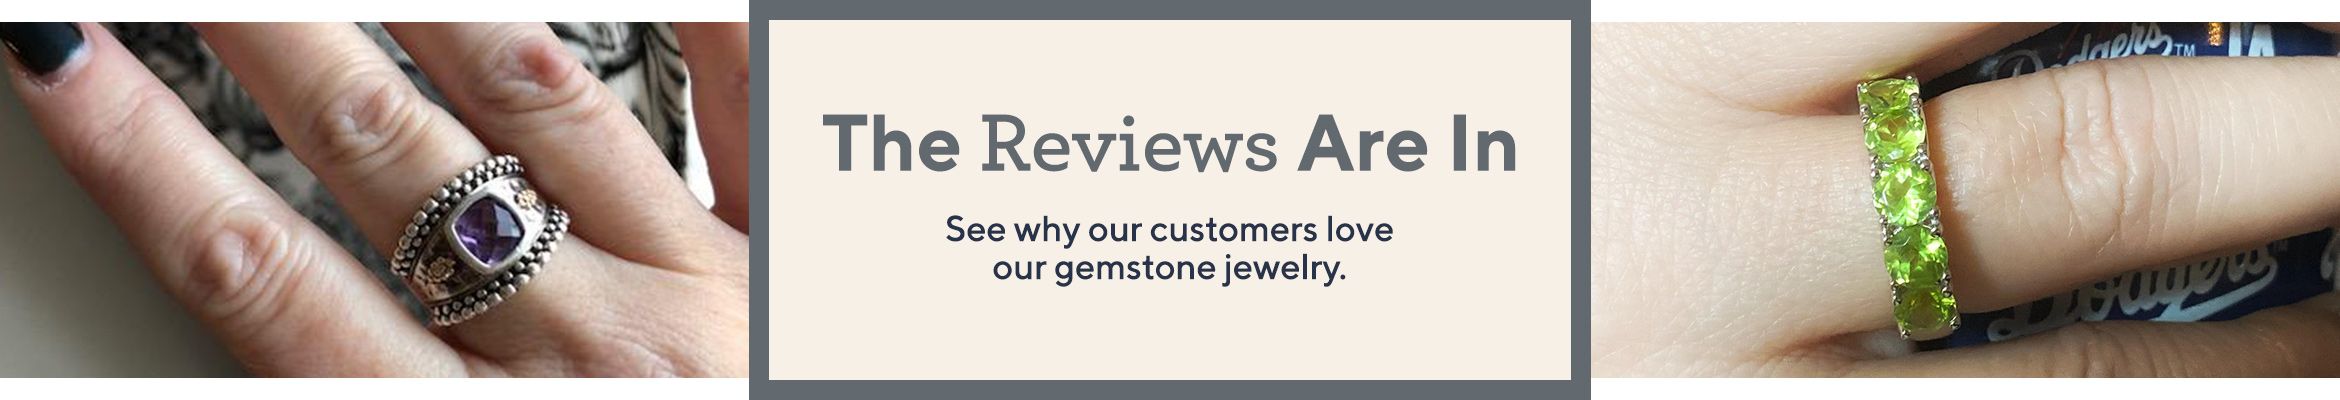 The Reviews Are In  See why our customers love our gemstone jewelry.